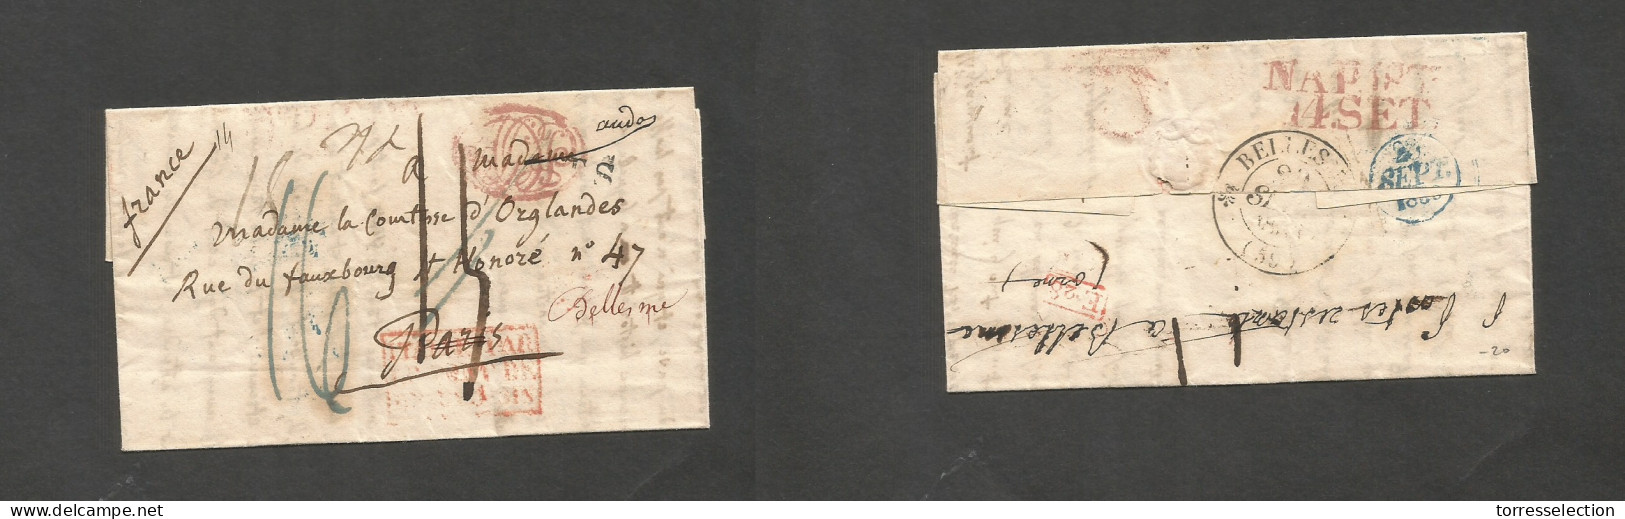 Italy - Prephilately. 1833 (14 Sept) Napoli - France, Paris, Fwded (29 Sept) Bellesme. Stampless E. With Text Several Tr - Ohne Zuordnung